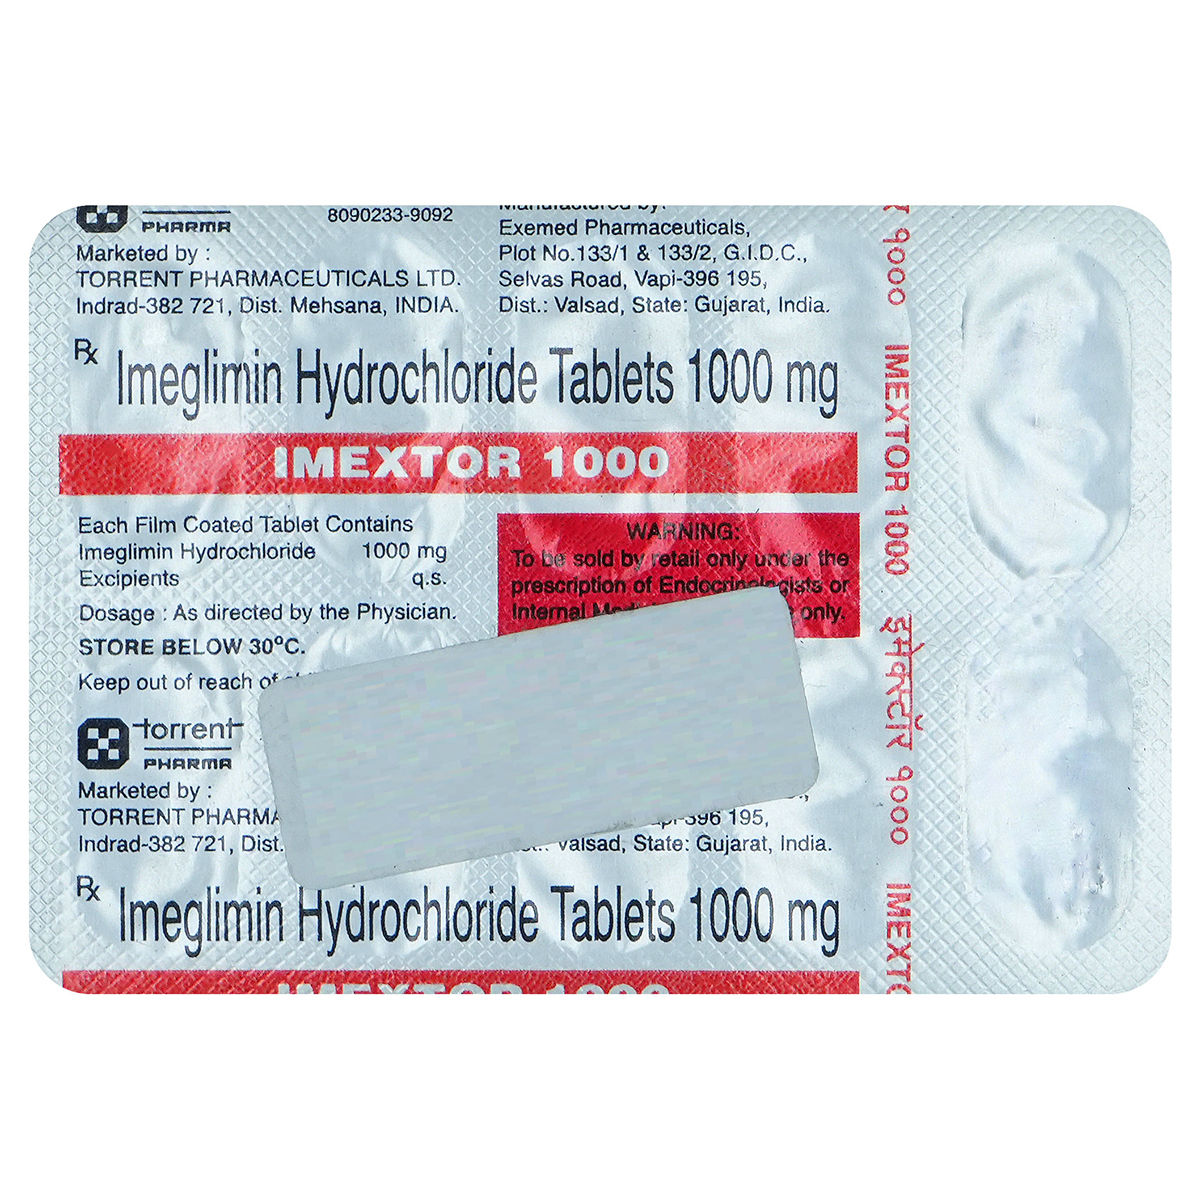 Buy Imextor 1000 mg Tablet 10's Online